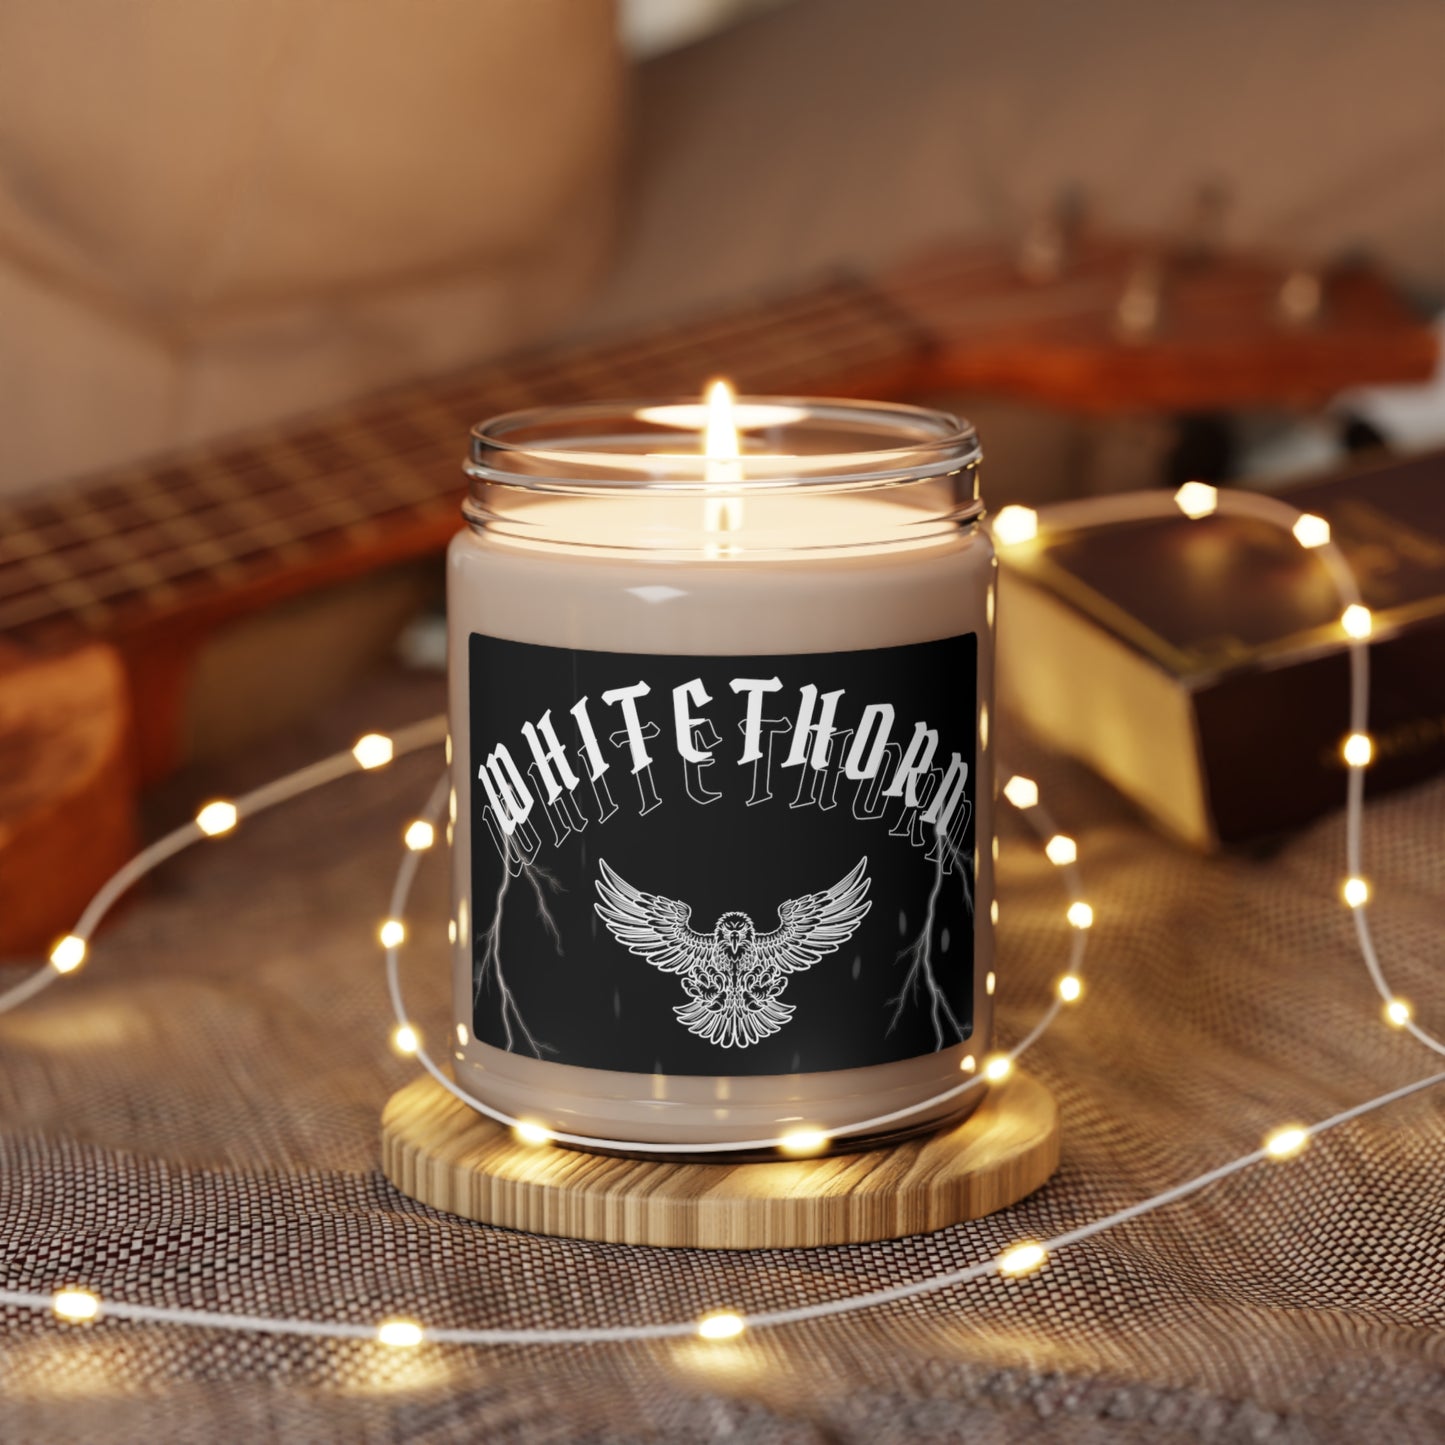 Rowan Whitethorn, Scented Soy Candle, 9oz, Throne of Glass